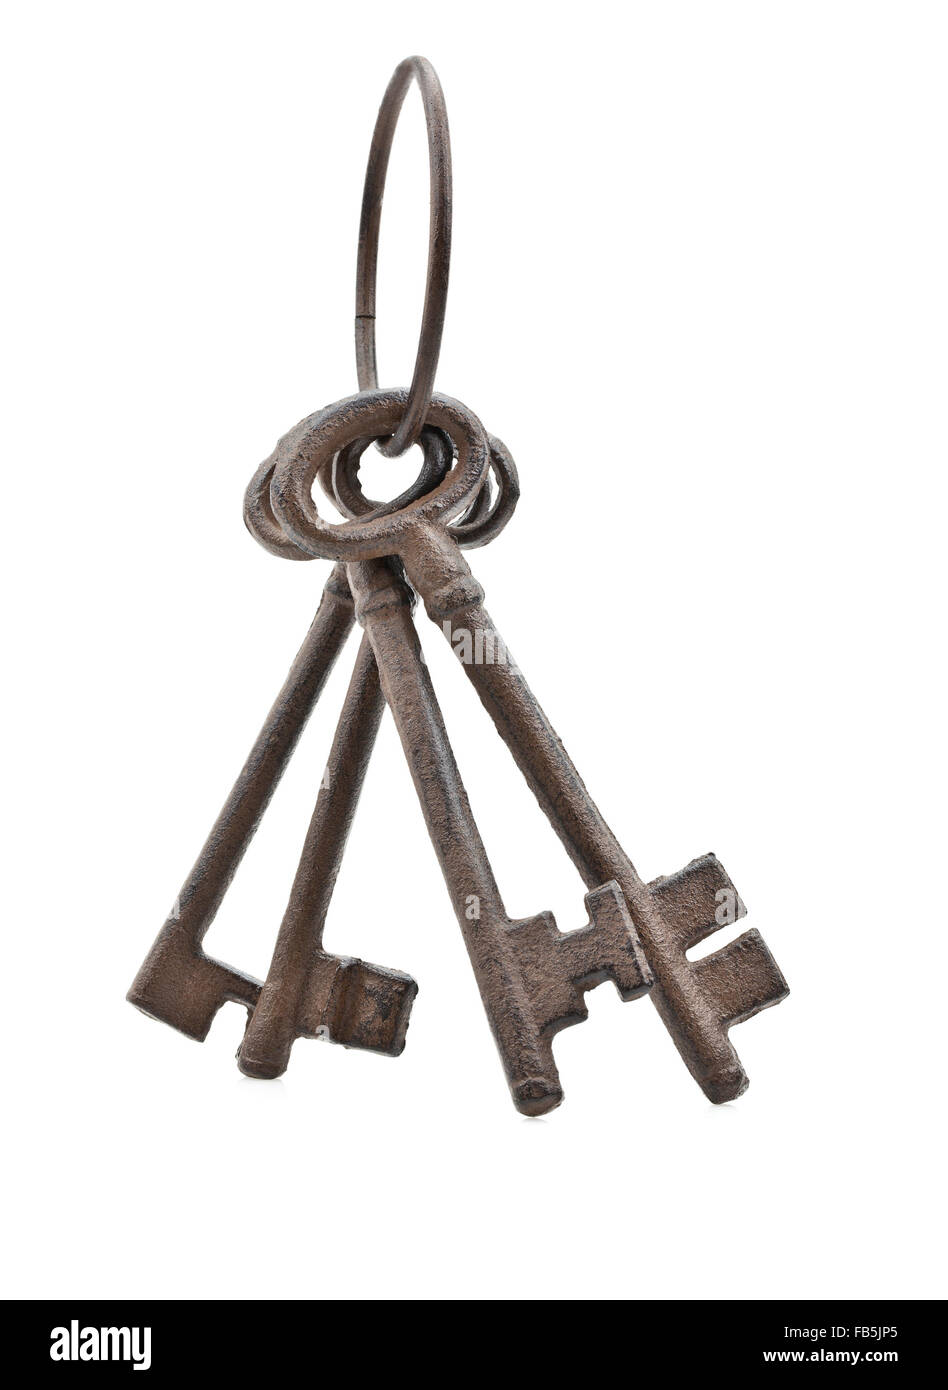 Set of old rusty antique keys over white background Stock Photo